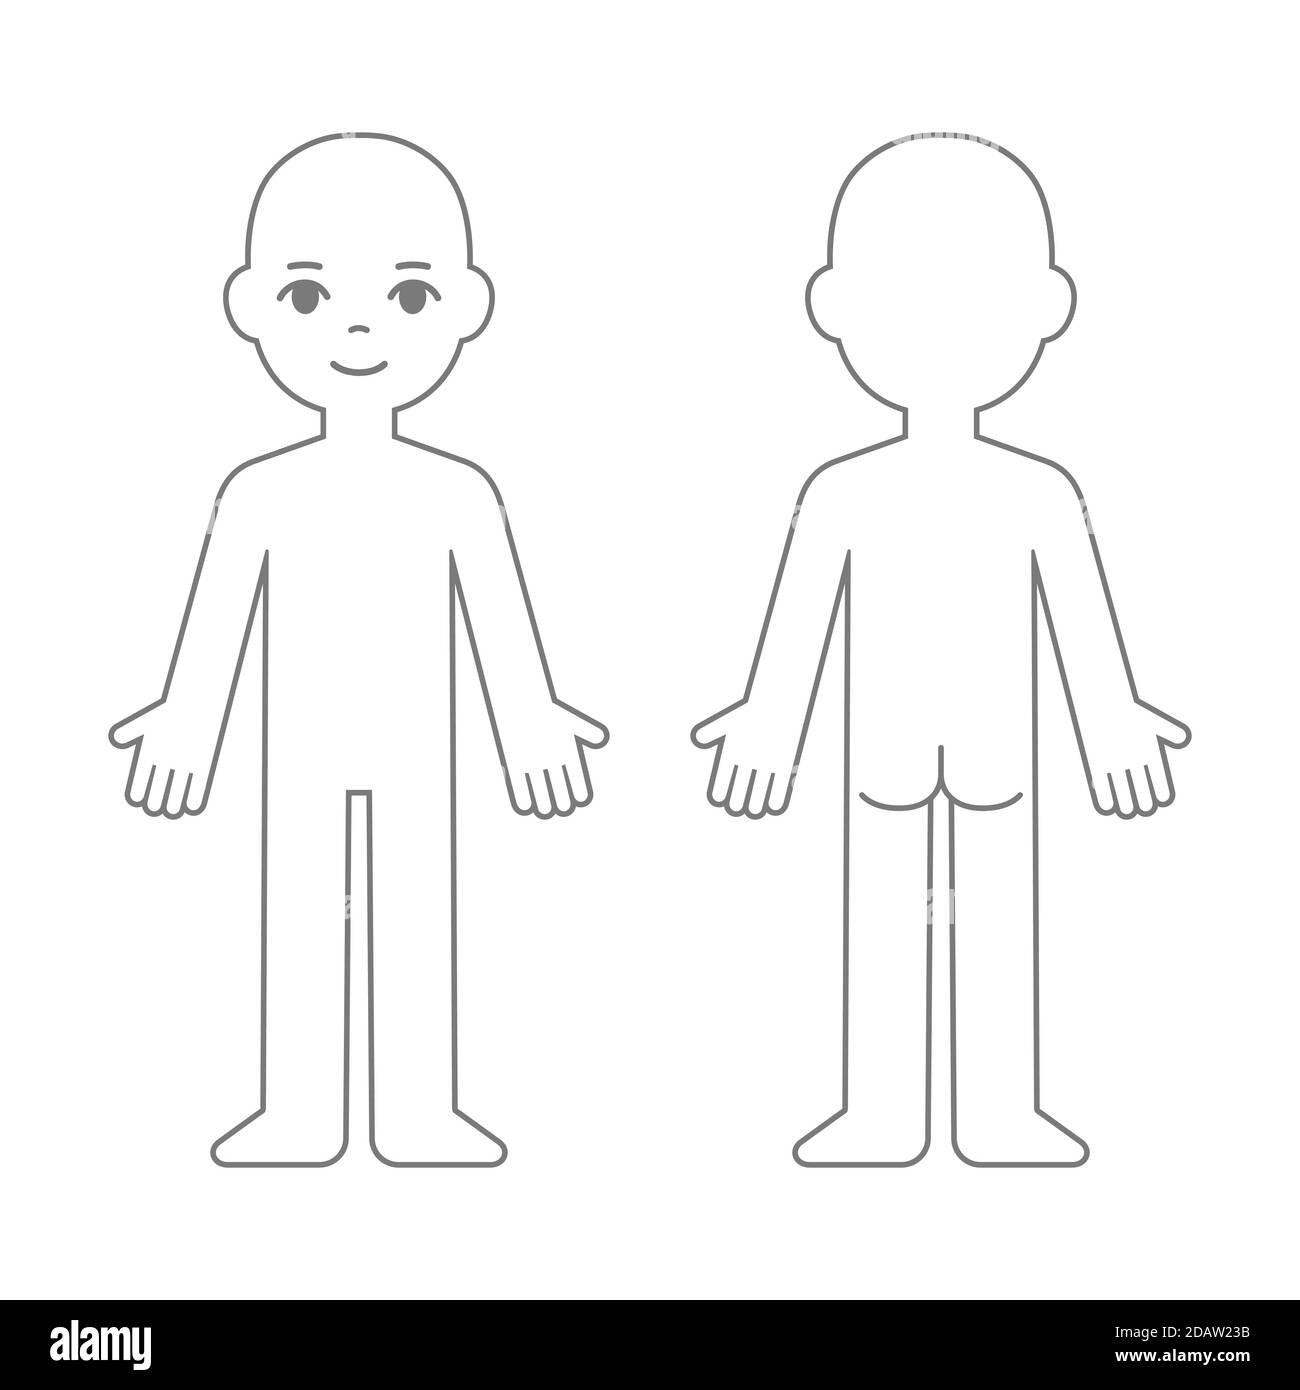 Cartoon child body chart, front and back view. Blank unisex body outline template. Isolated vector illustration. Stock Vector